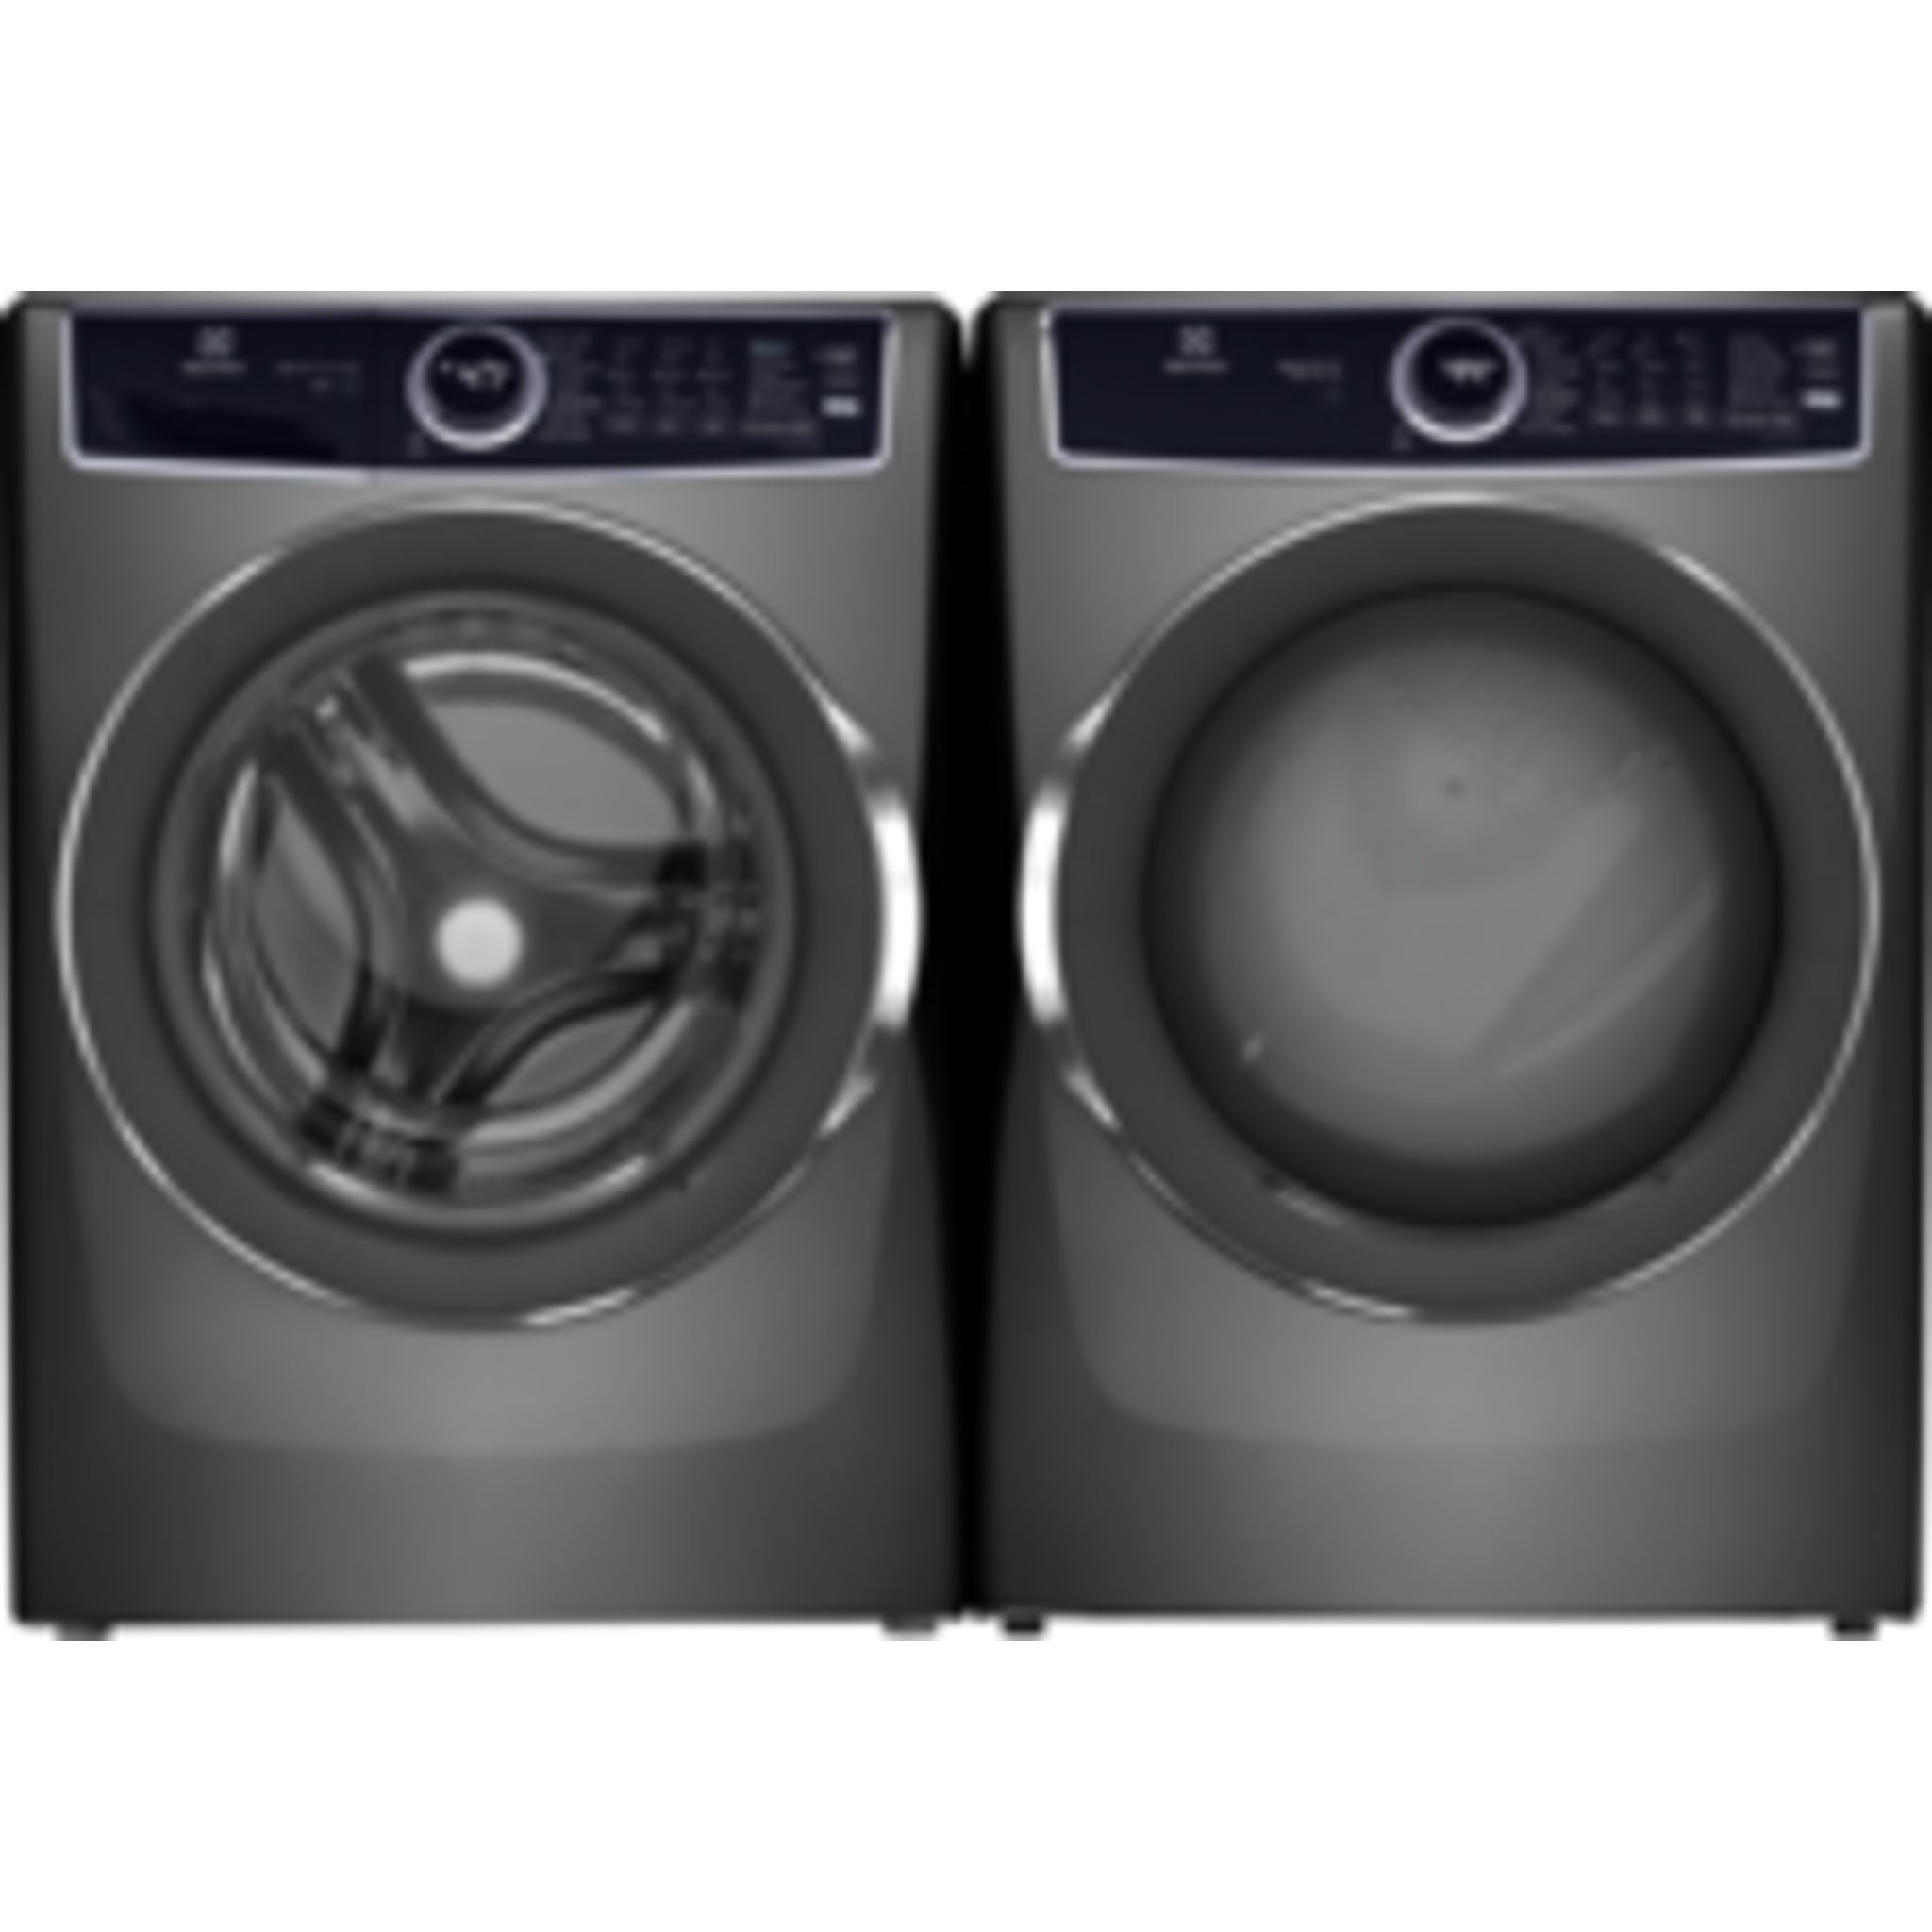 Electrolux Home Products, Electrolux Front Load Pair (1554079K) - Titanium